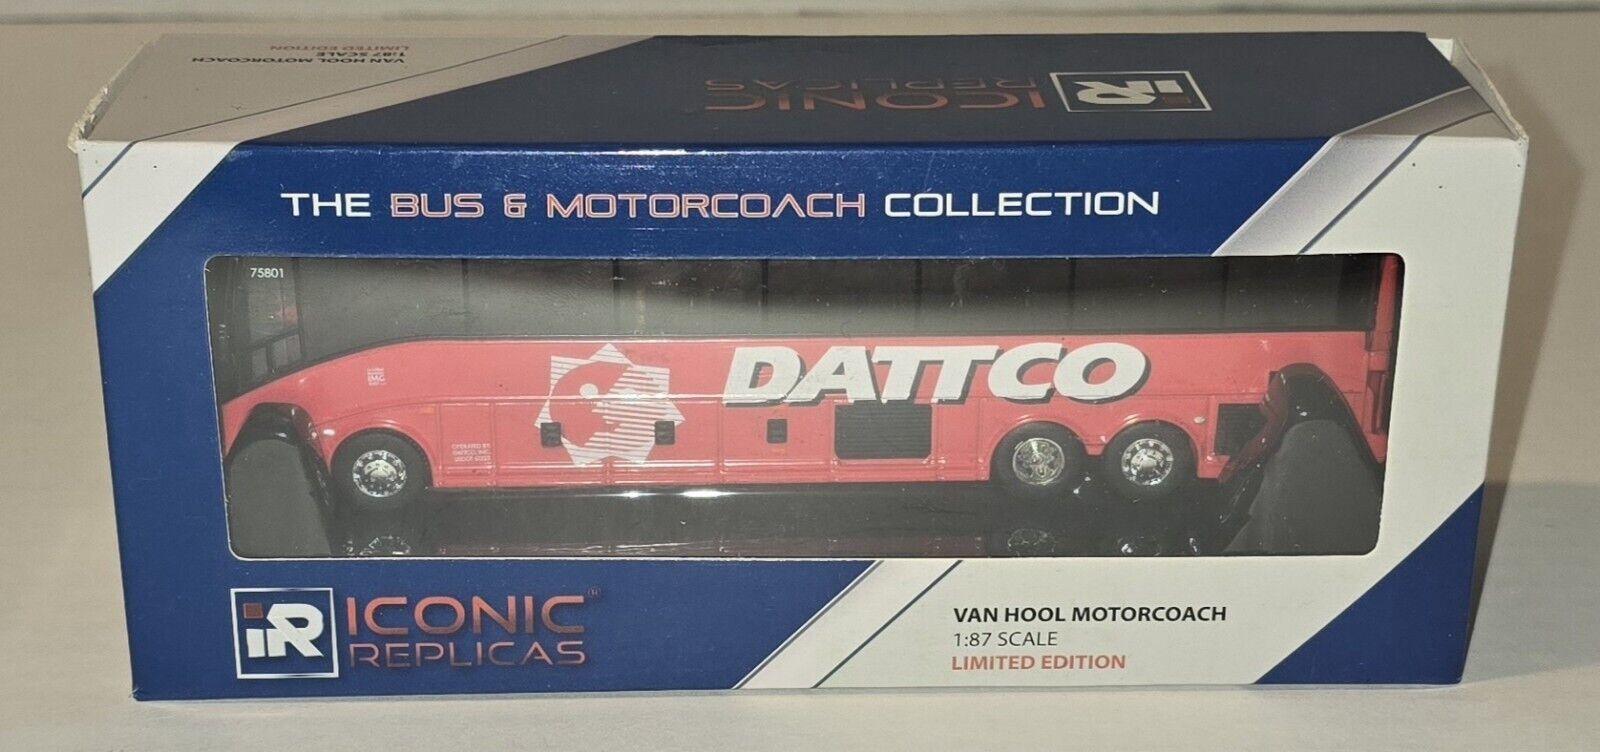 Iconic Replicas Dattco Van Hool Motorcoach 1:87 Scale Limited Edition New NIB